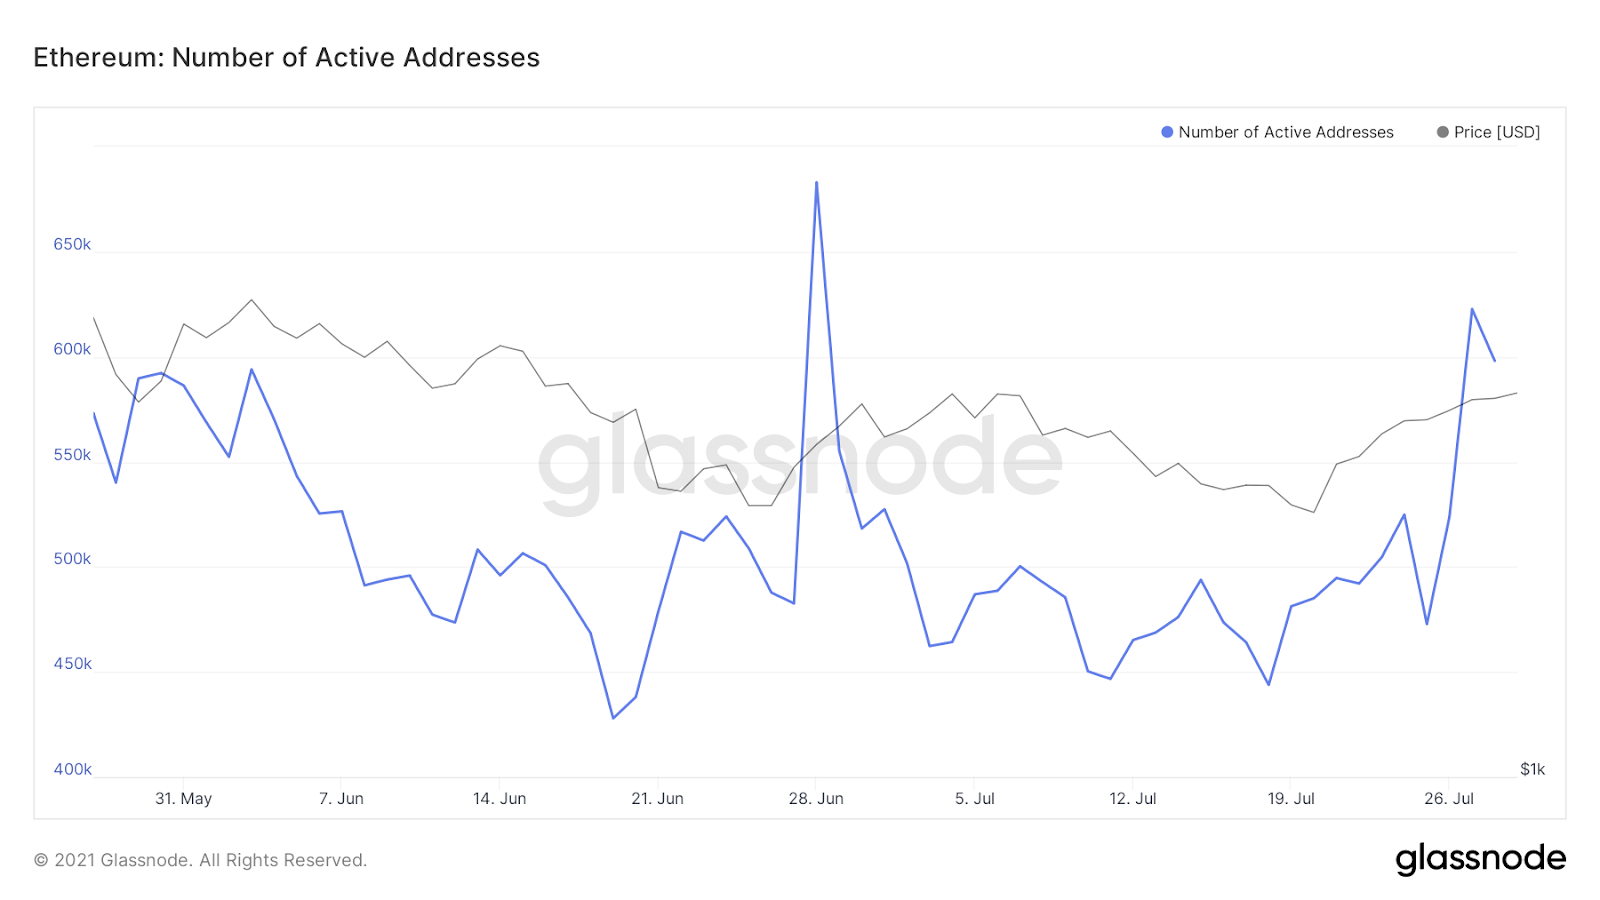 ETH active addresses shows more activity 